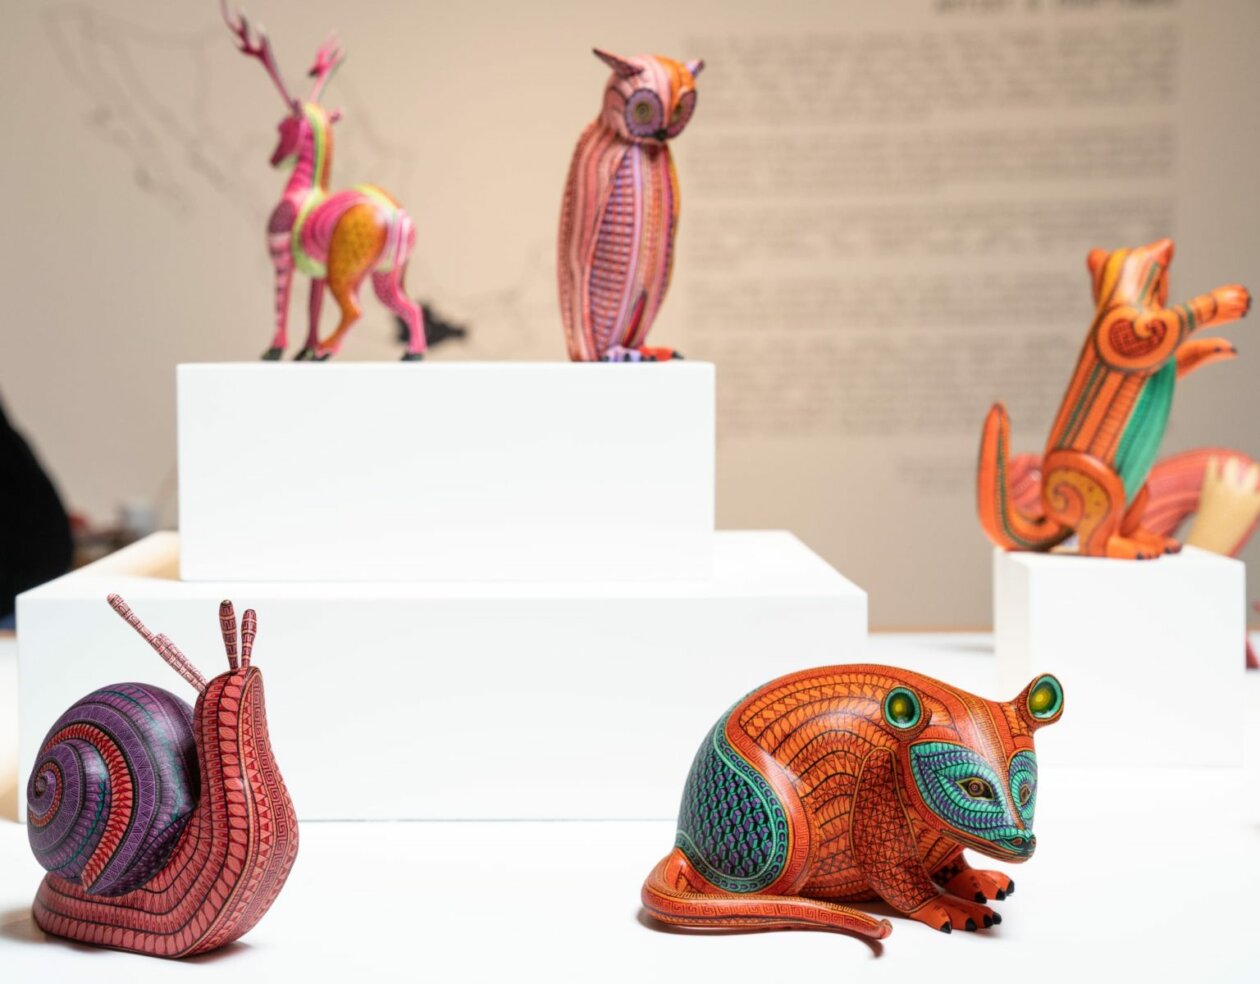 Multicolored Hand Carved Sculptures Inspired By Mexican Folk Art By Jacobo And Maria Angeles (15)